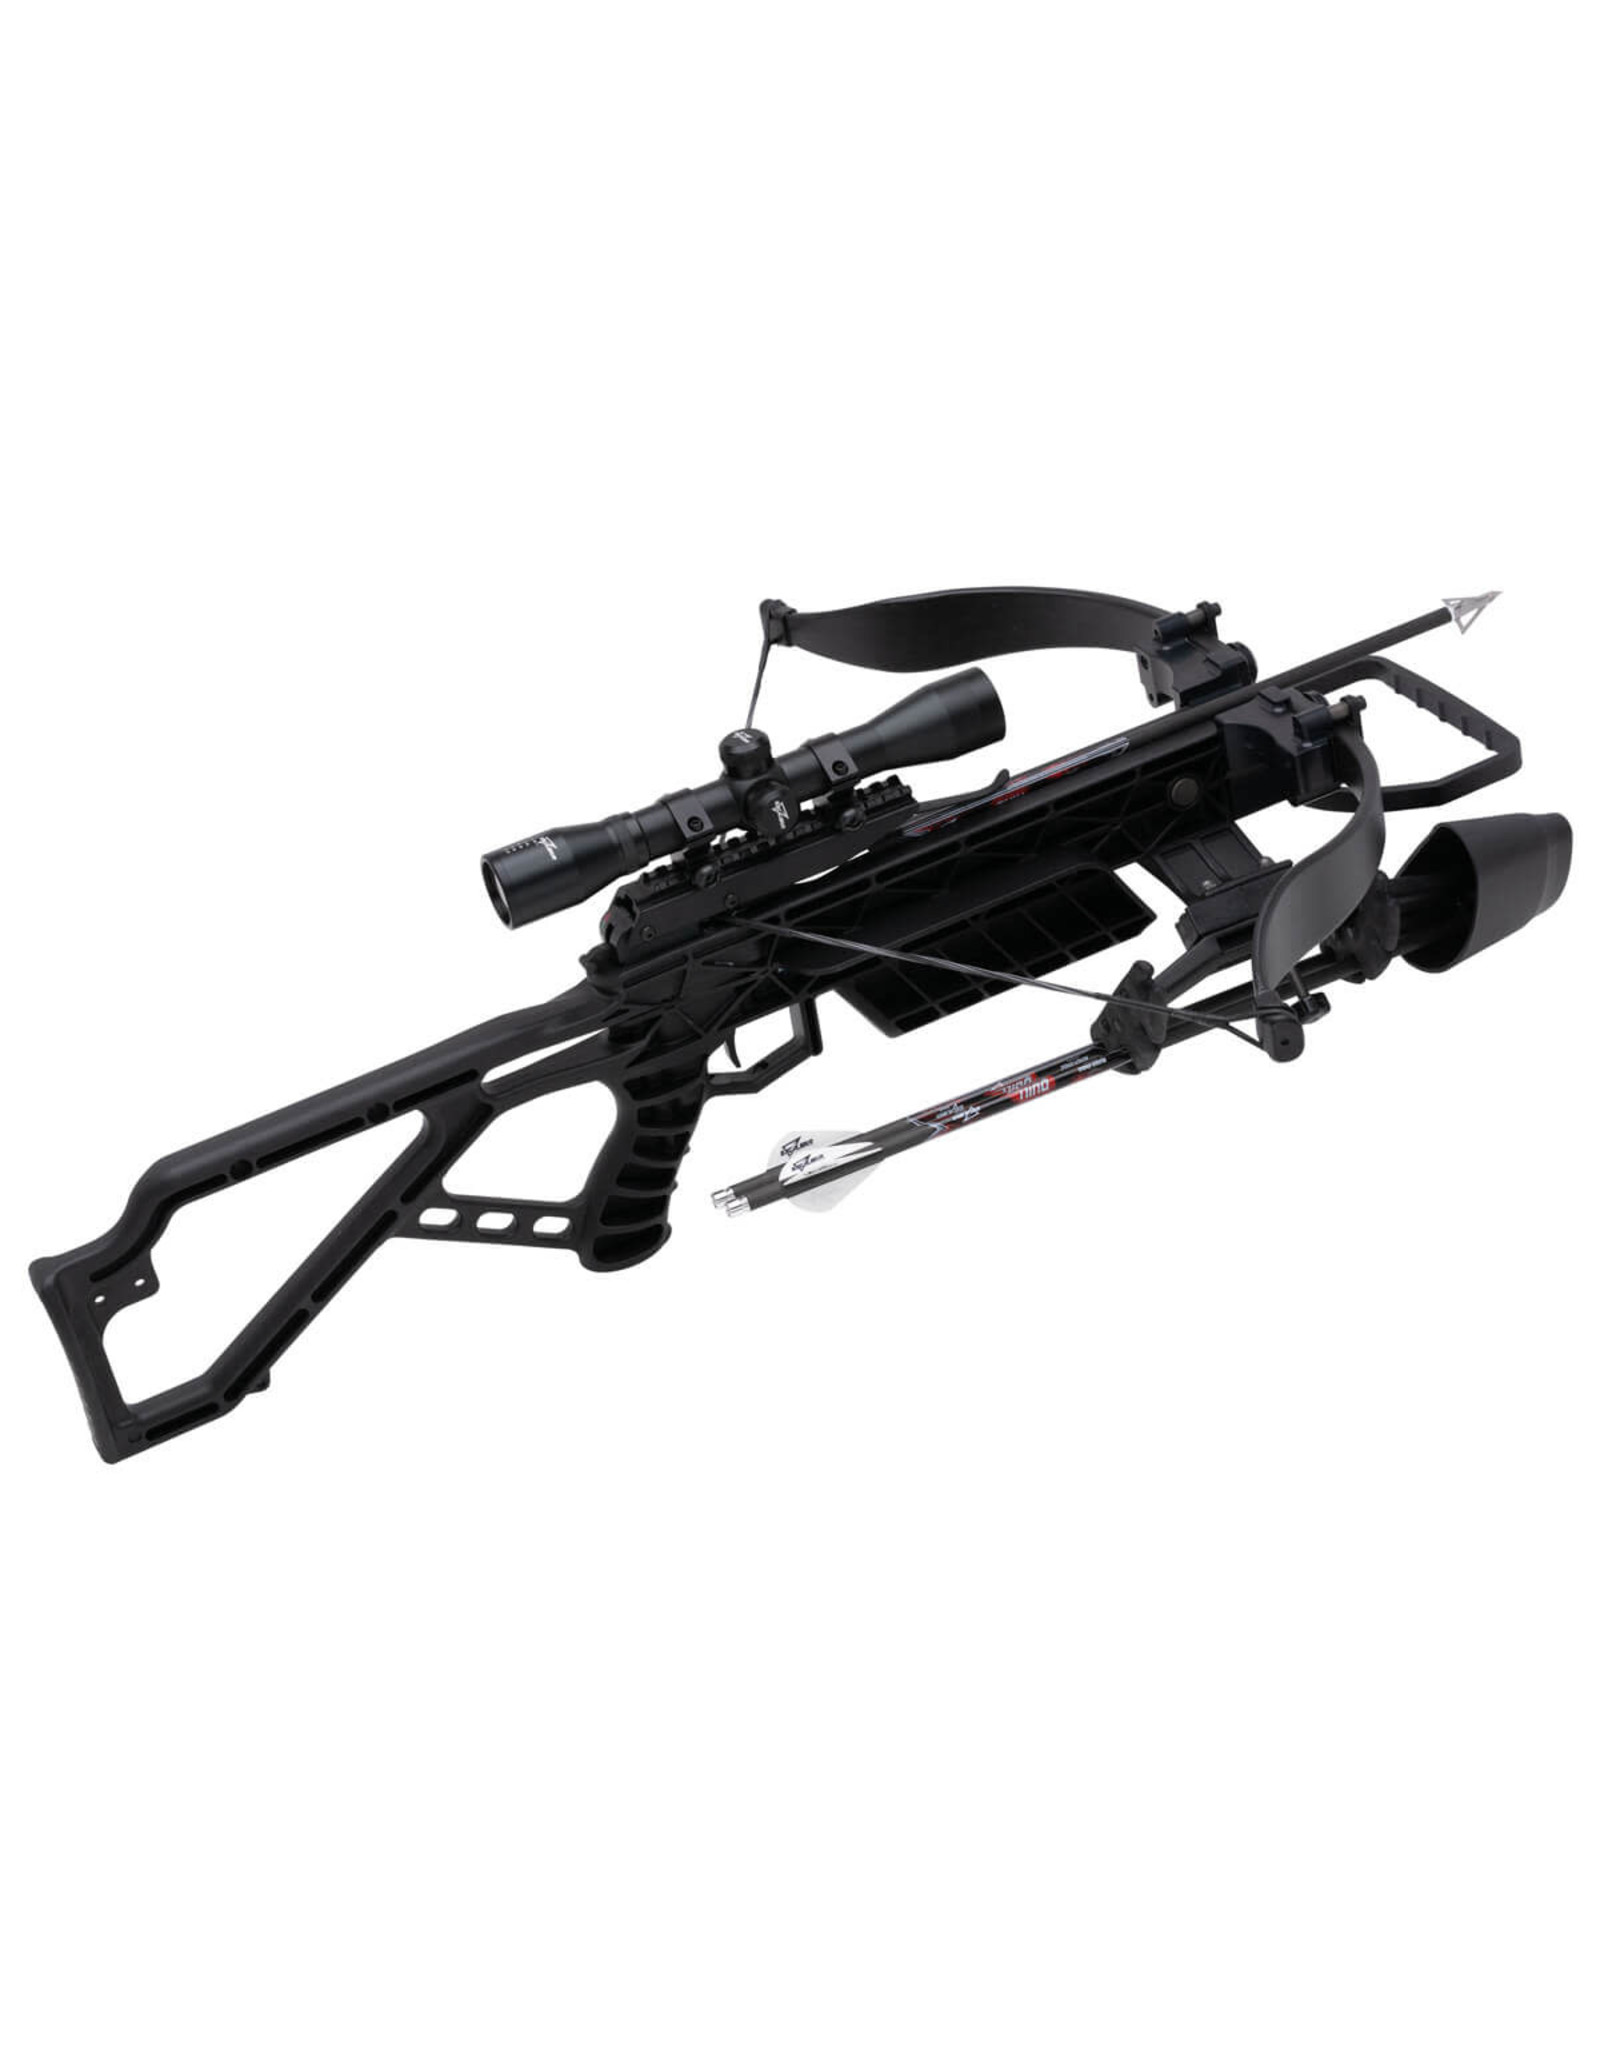 Excalibur Excalibur MAG AIR Bow package 305 FPS